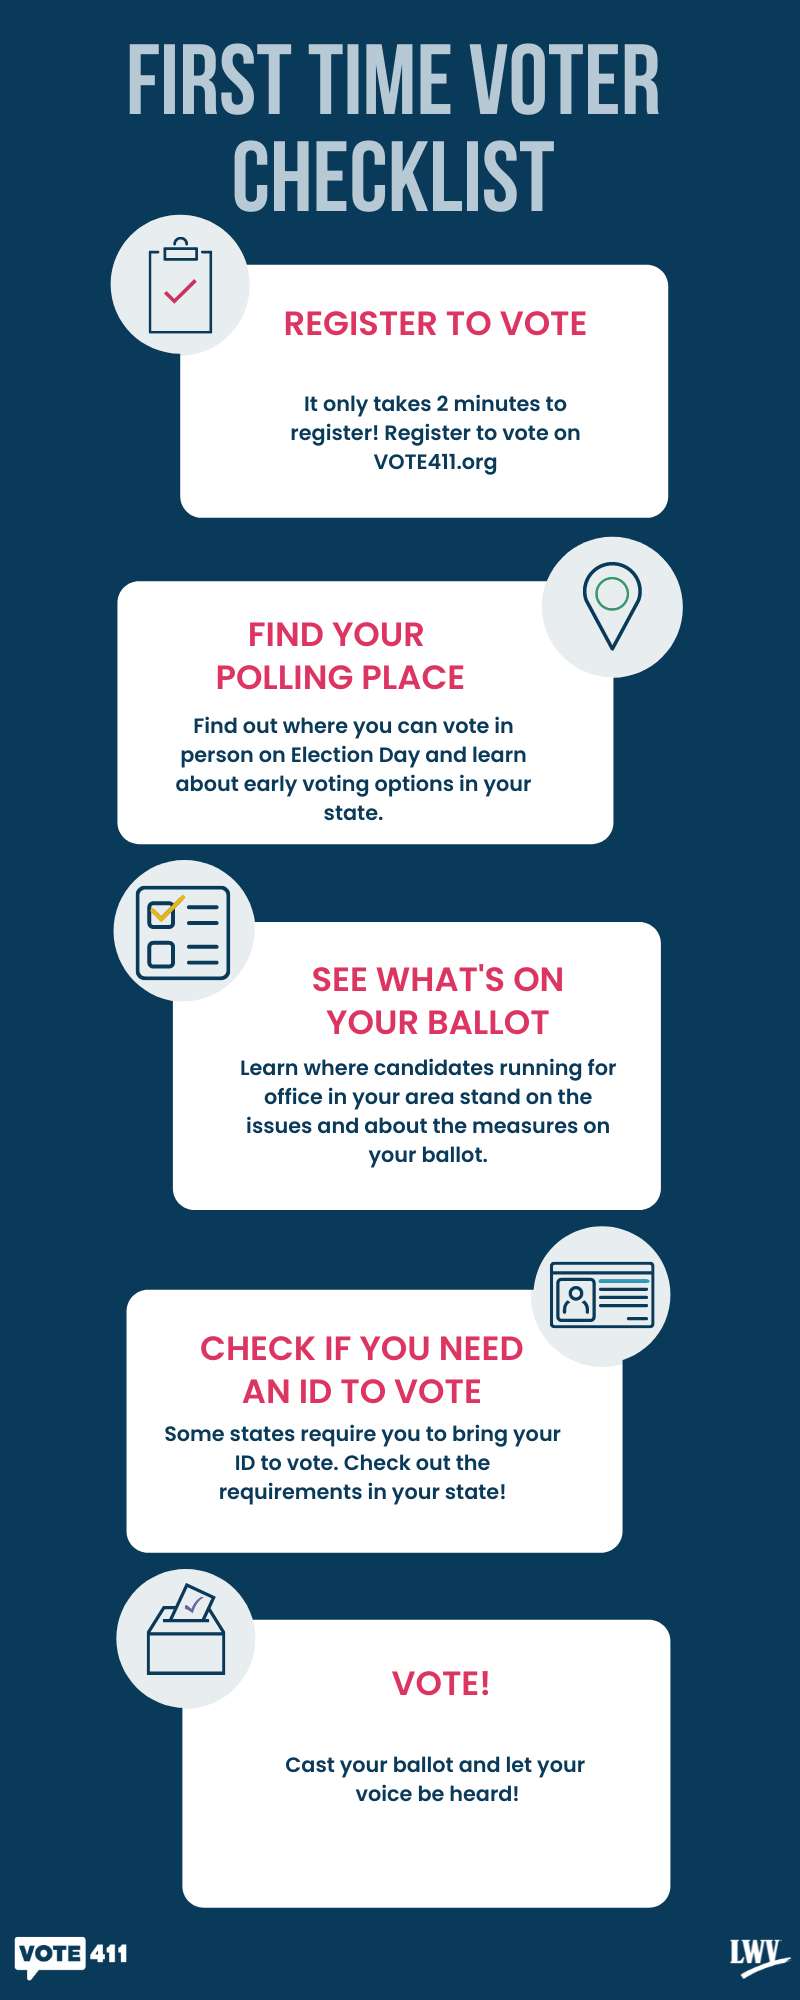 An infographic of the first-time voter checklist